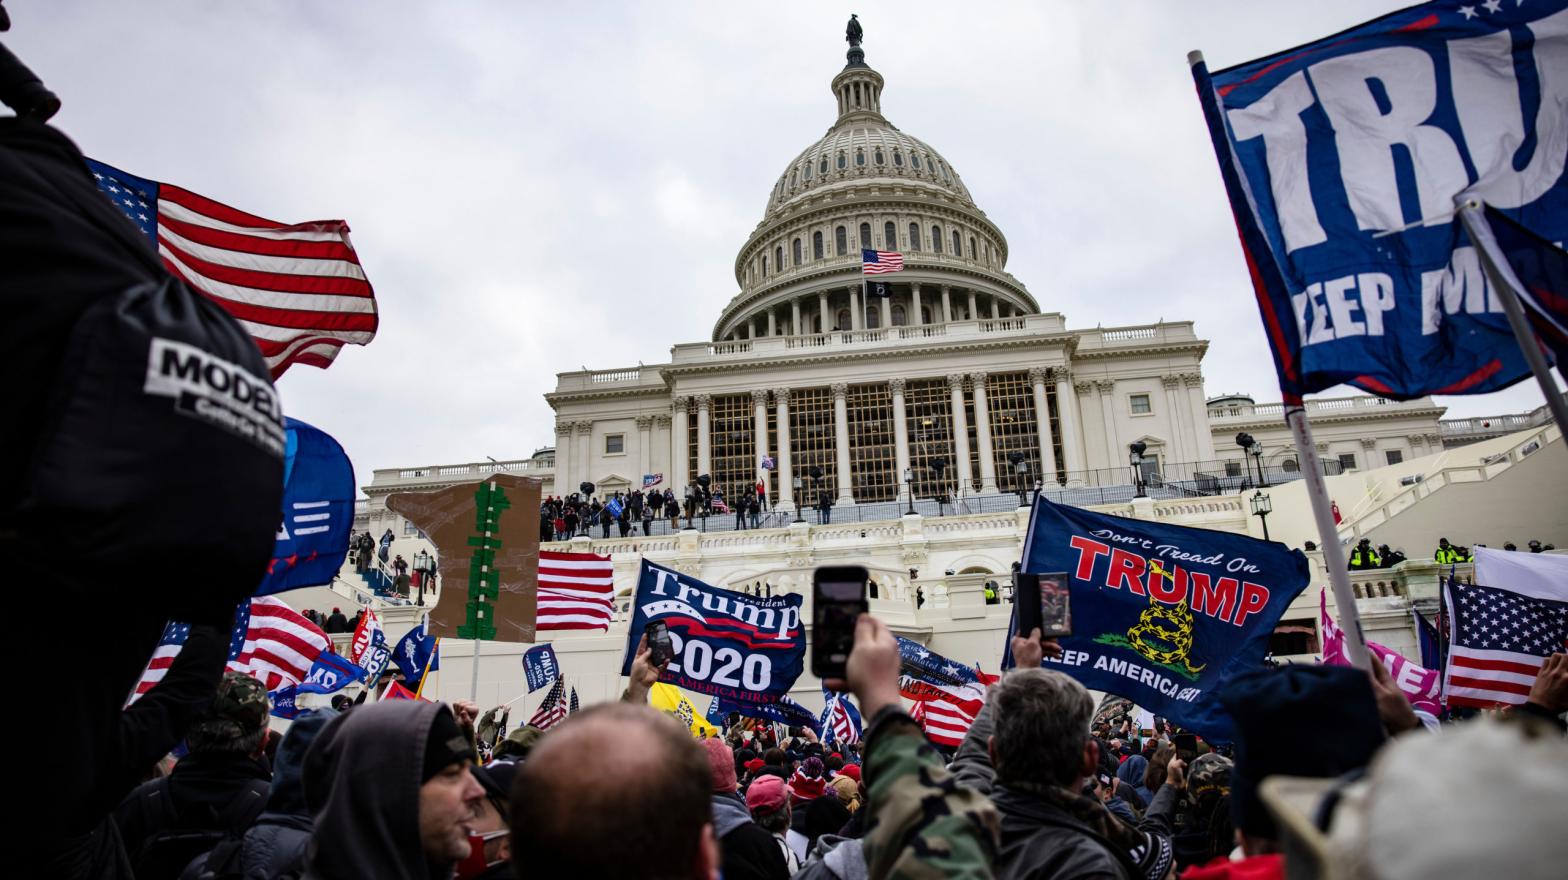 Pro-Trump insurgents storm the U.S. Capitol following a rally with President Donald Trump on January 6, 2021 in Washington, D.C.  (Photo: Samuel Corum, Getty Images)